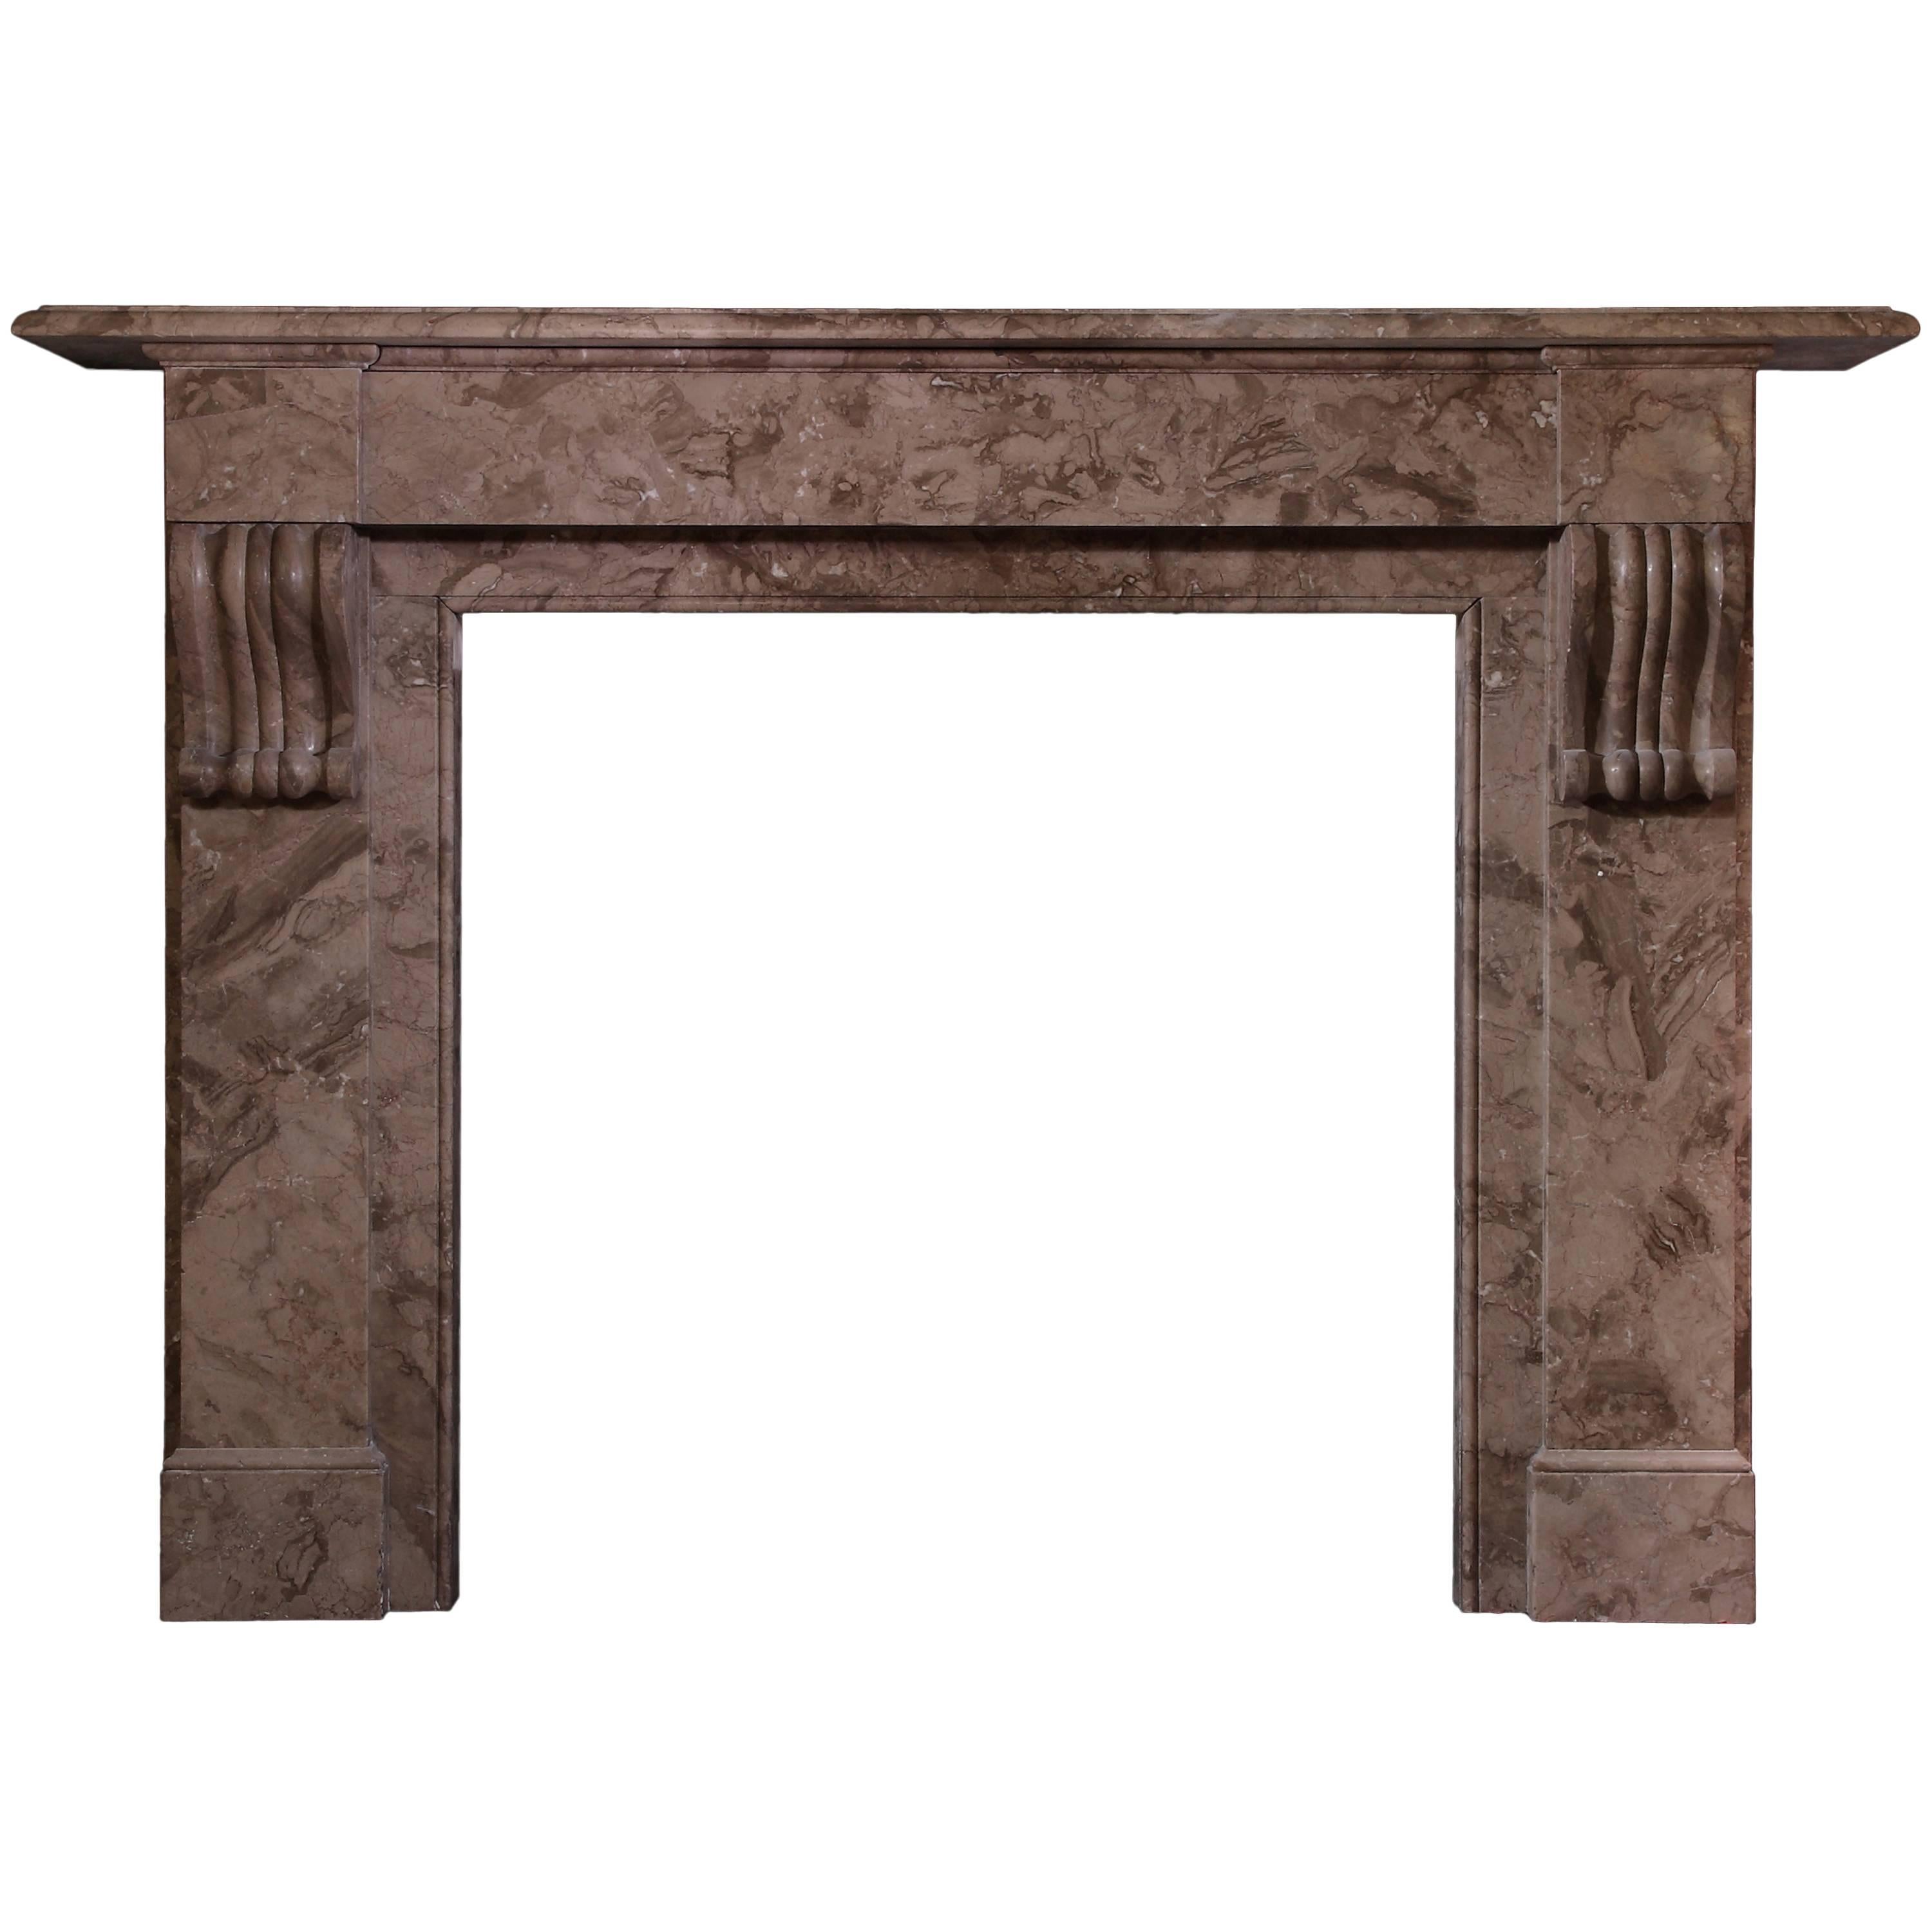 19th Century French Victorian Mantel carved in Belgian Marble (FR-ZE44)